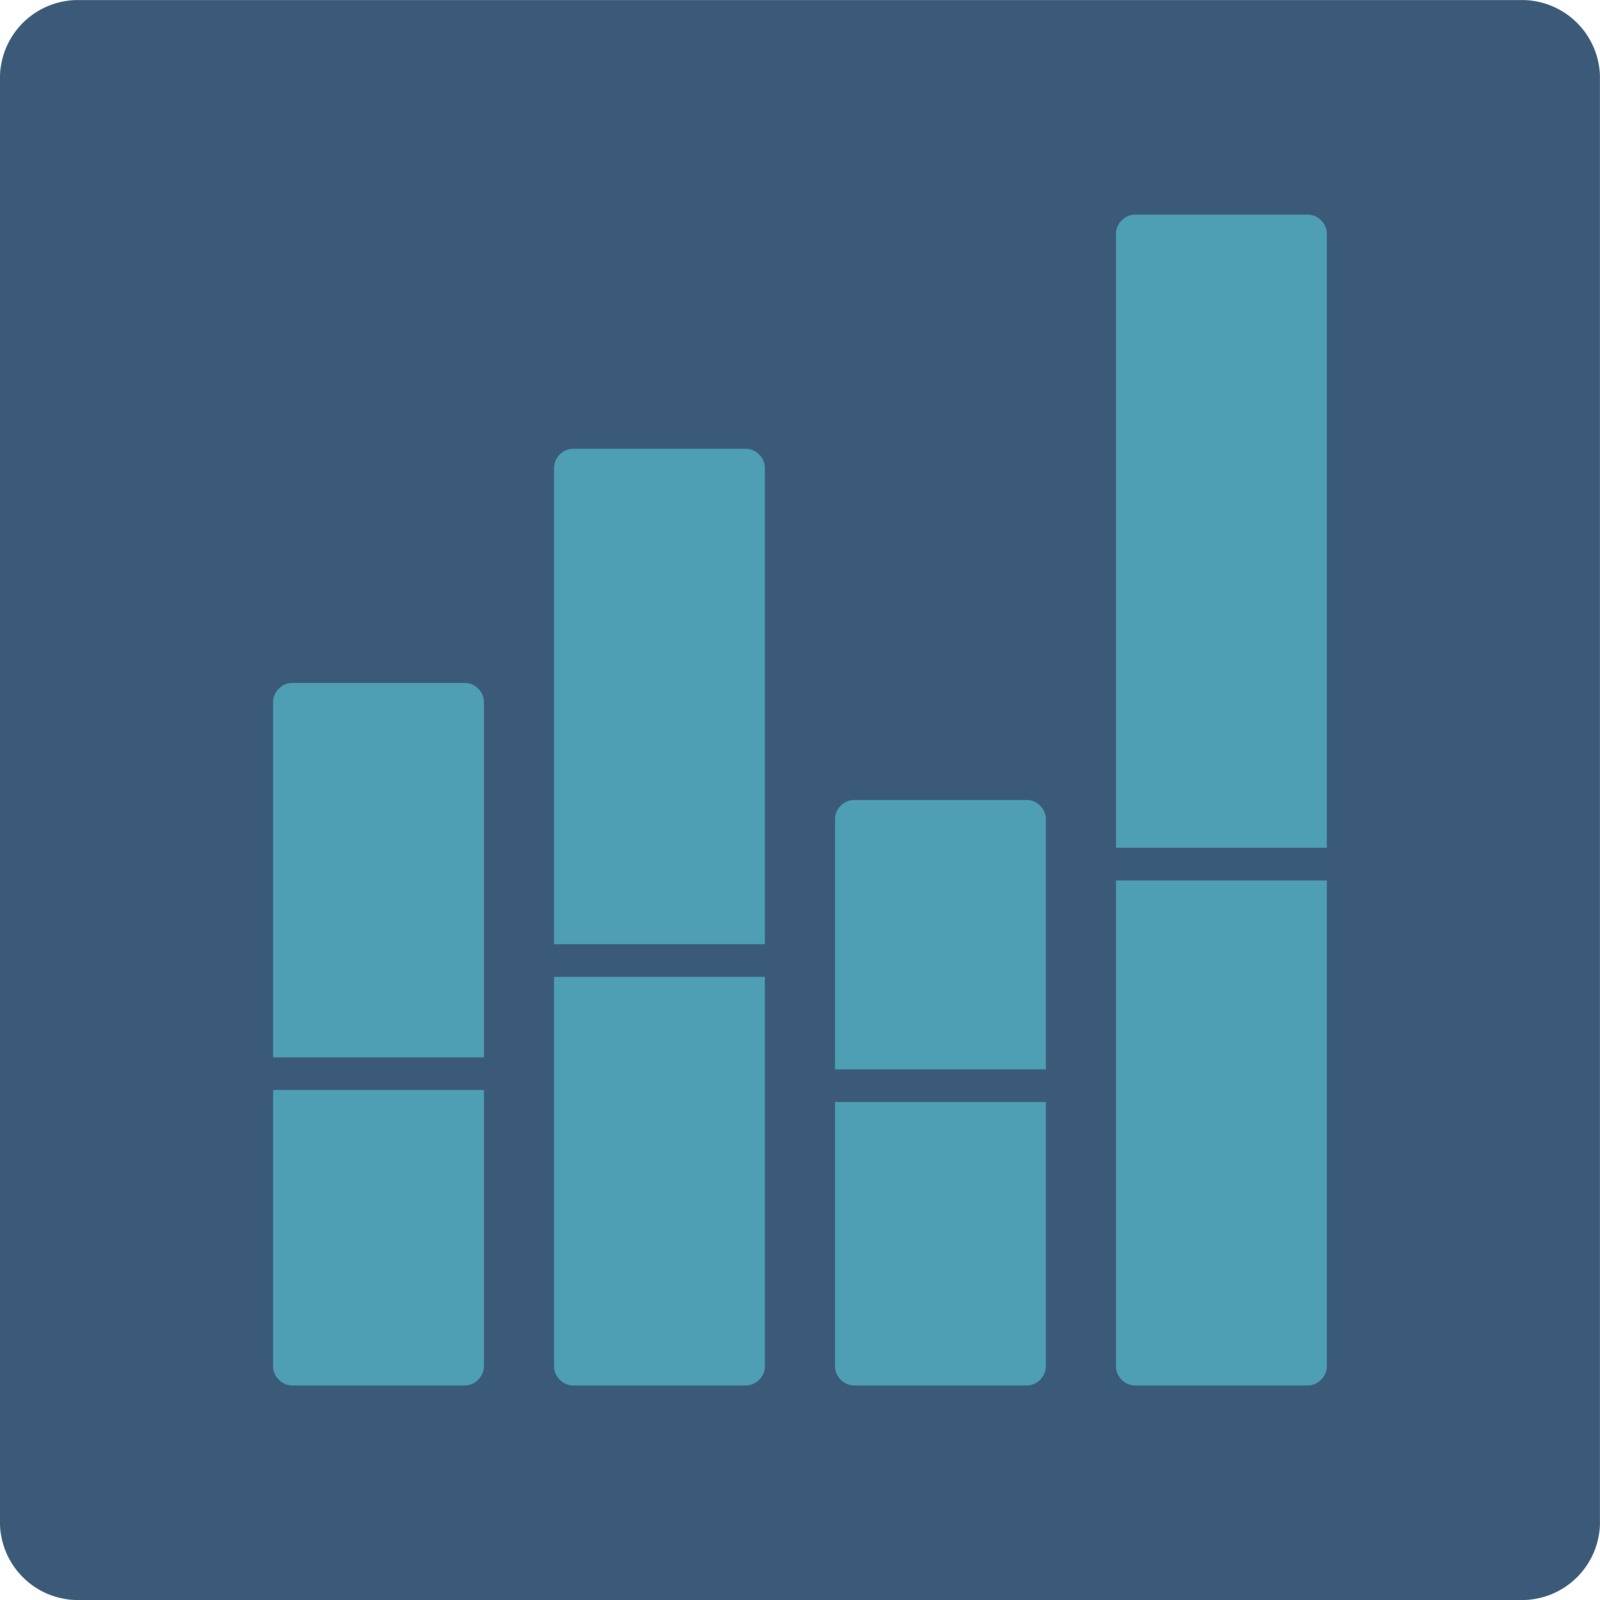 Bar Chart vector icon. This flat rounded square button uses cyan and blue colors and isolated on a white background.